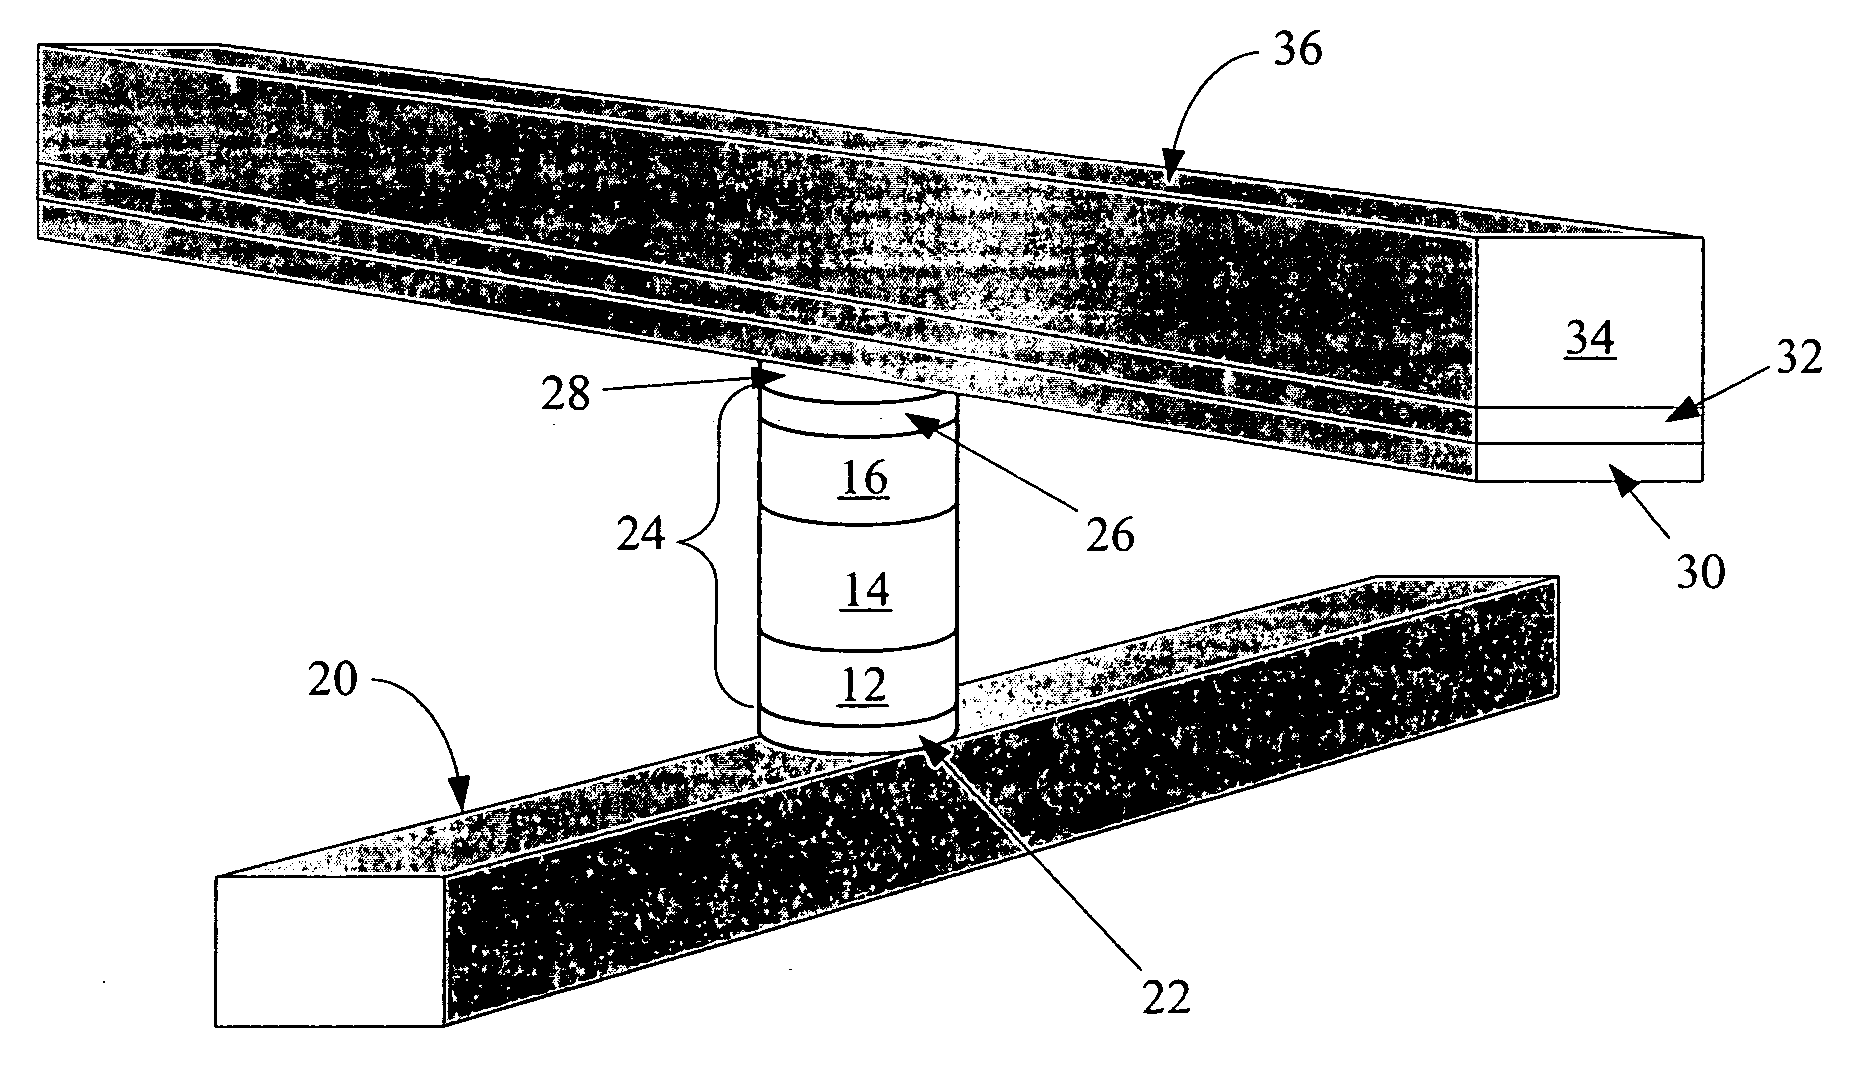 Non-volatile memory cell comprising a dielectric layer and a phase change material in series